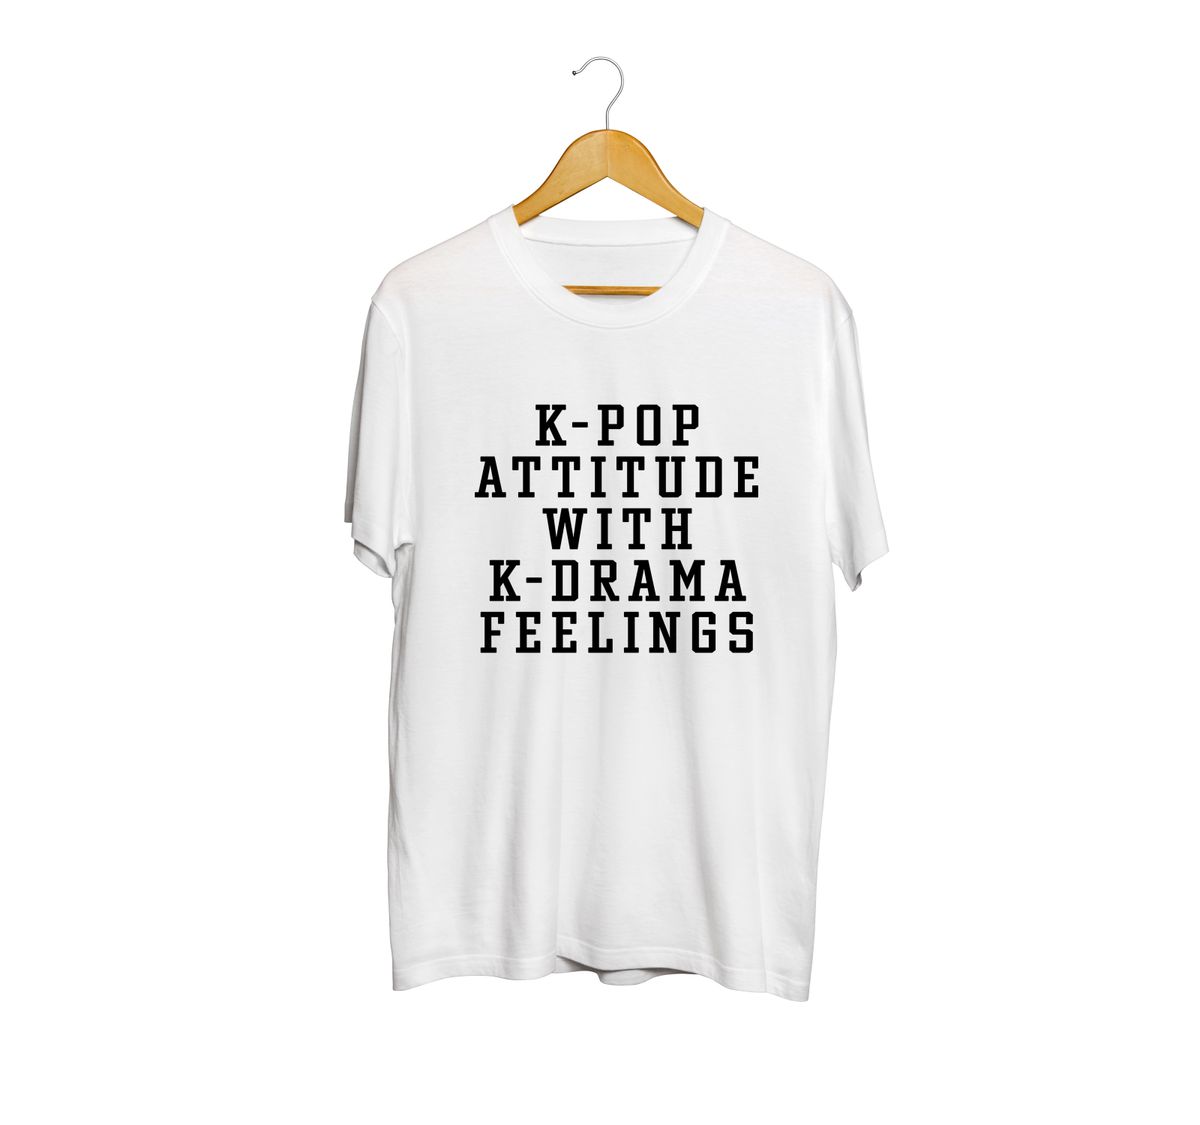 Fan Made Fits KPop Lovers Club White KDrama T-Shirt image 1